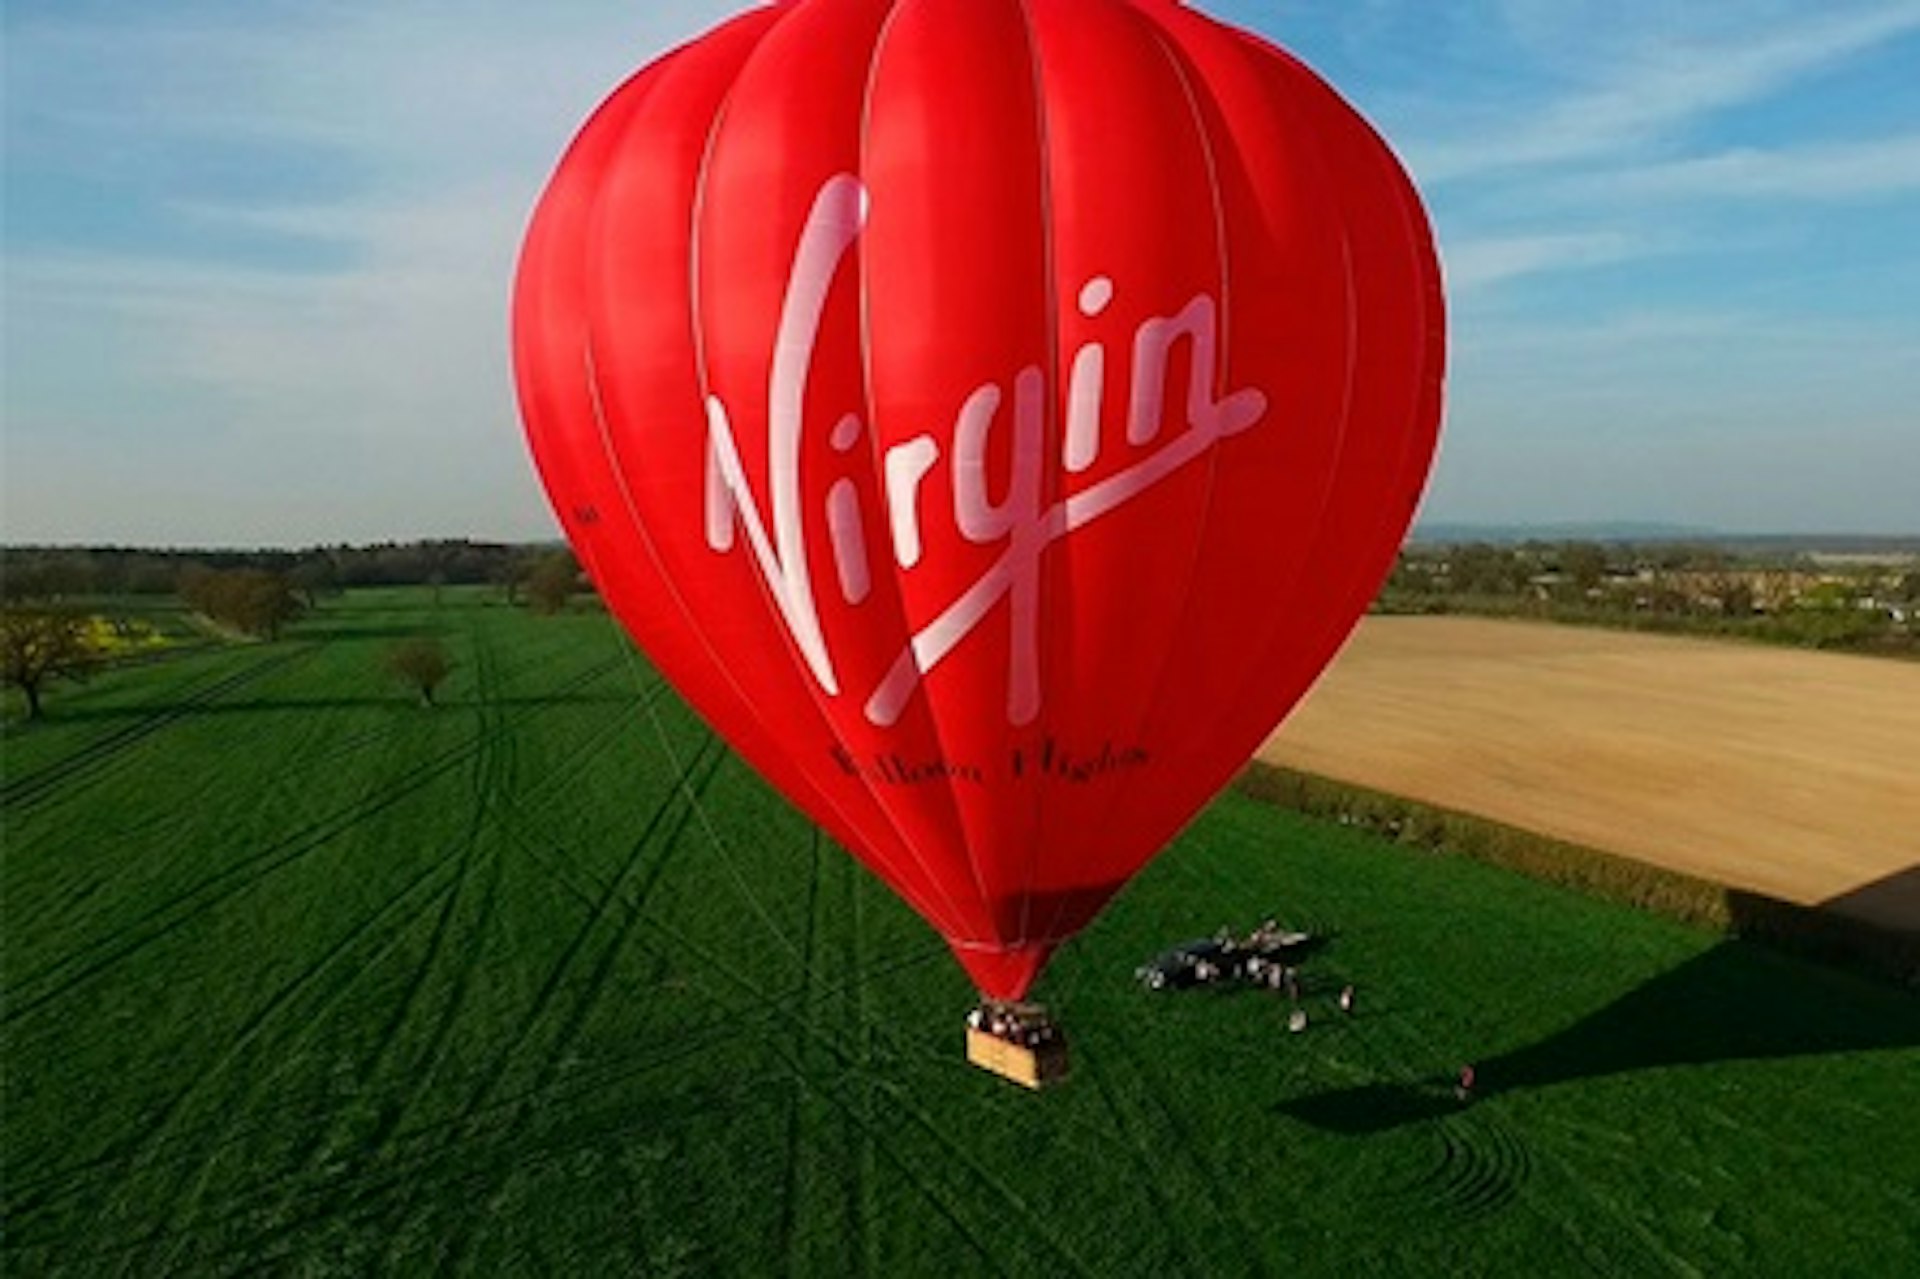 Weekday Virgin Hot Air Ballooning for Two 1